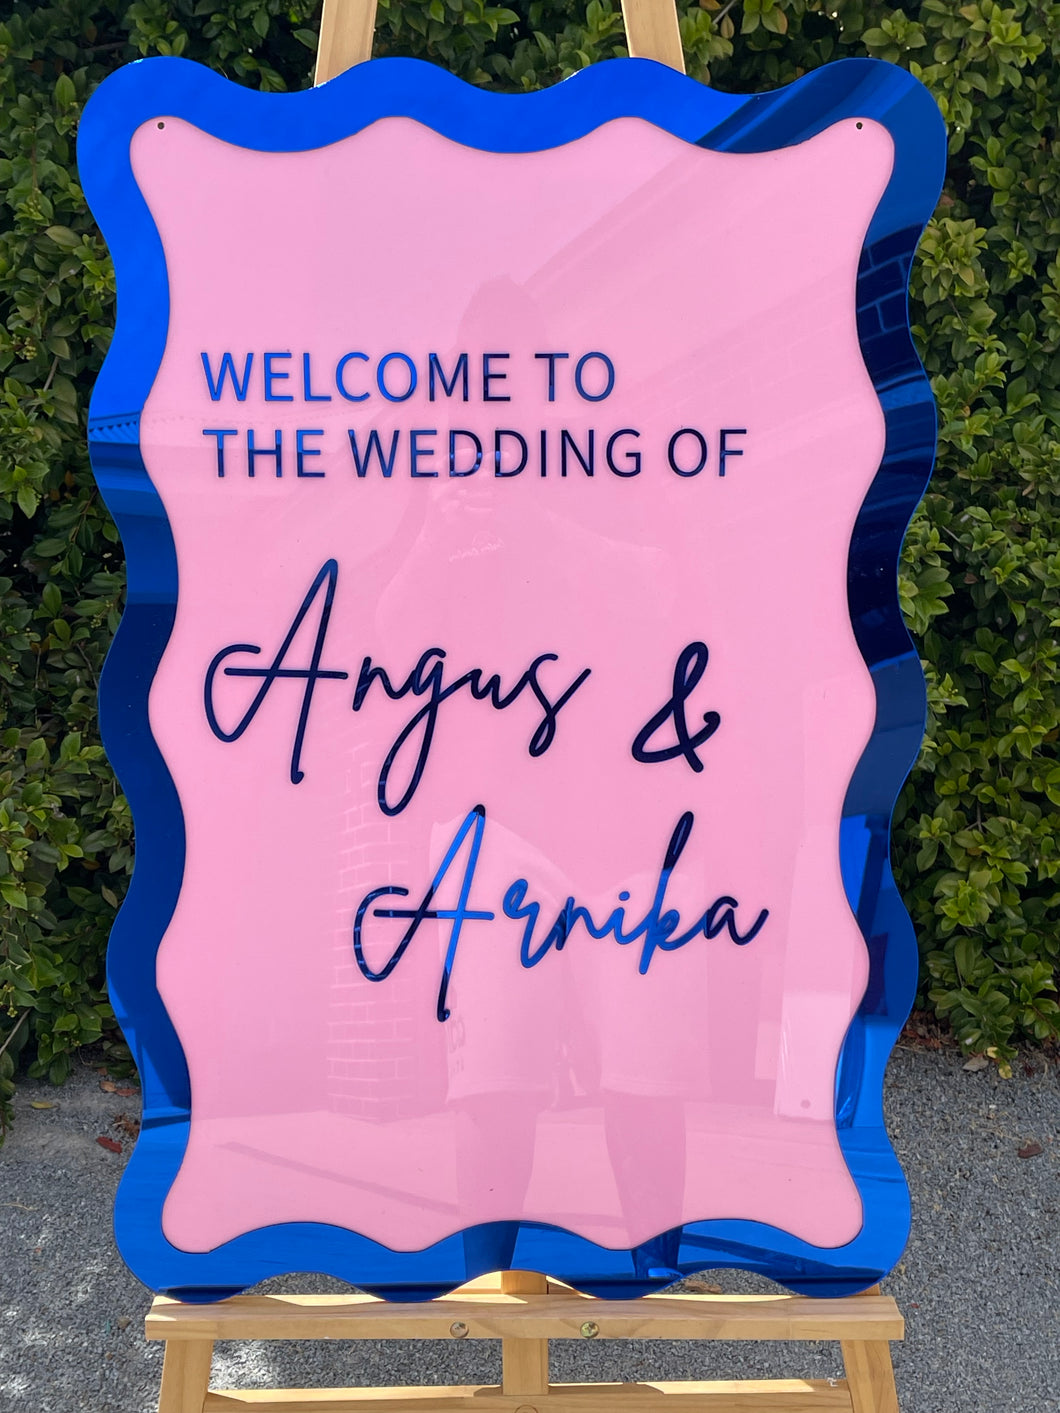 Welcome Sign - Angus